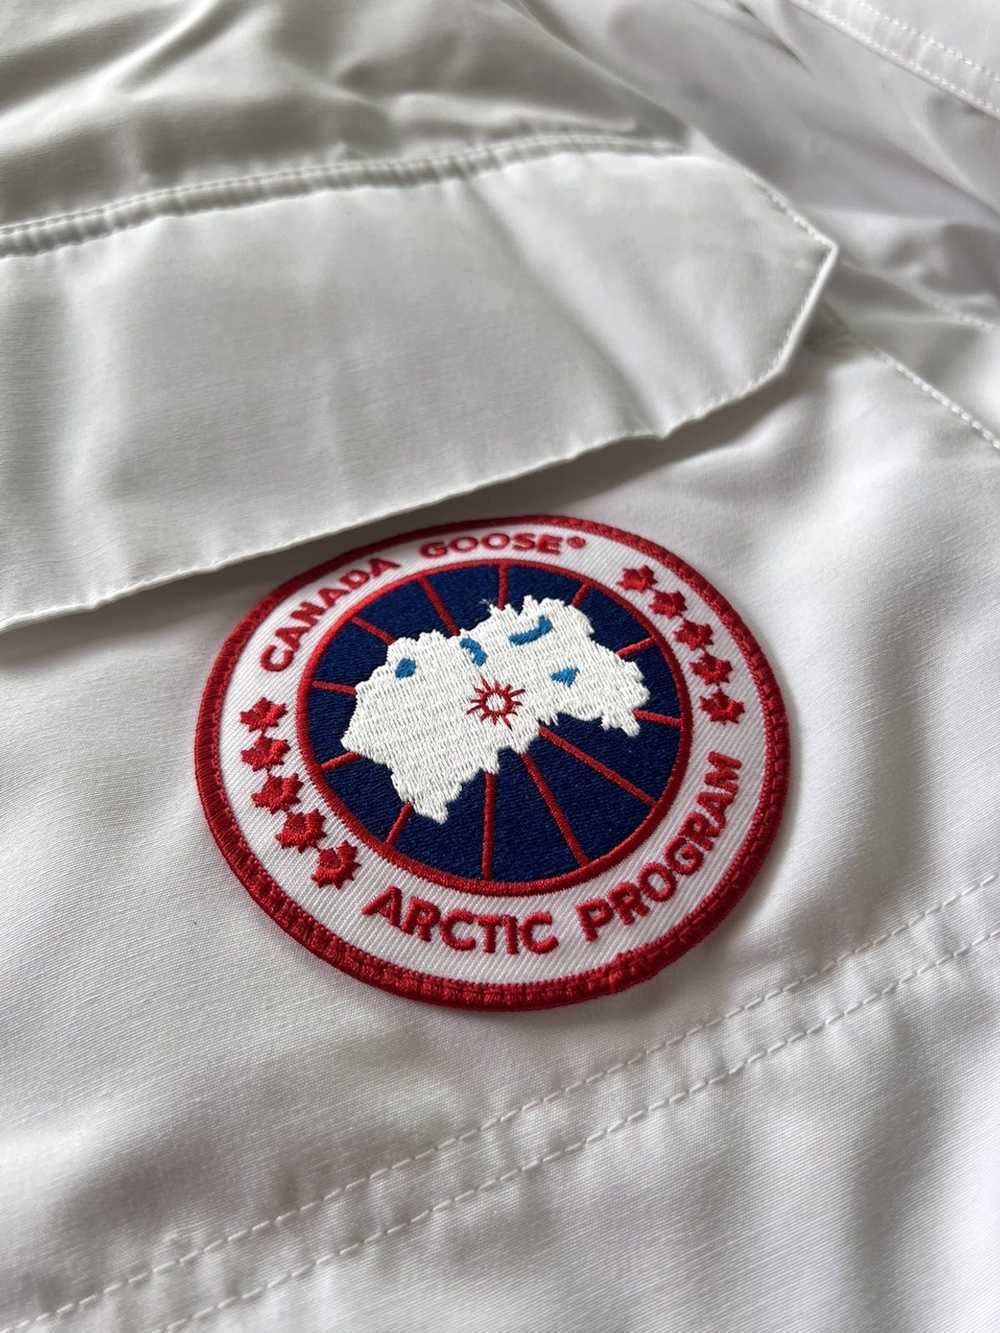 Canada Goose Expedition Parka - image 2